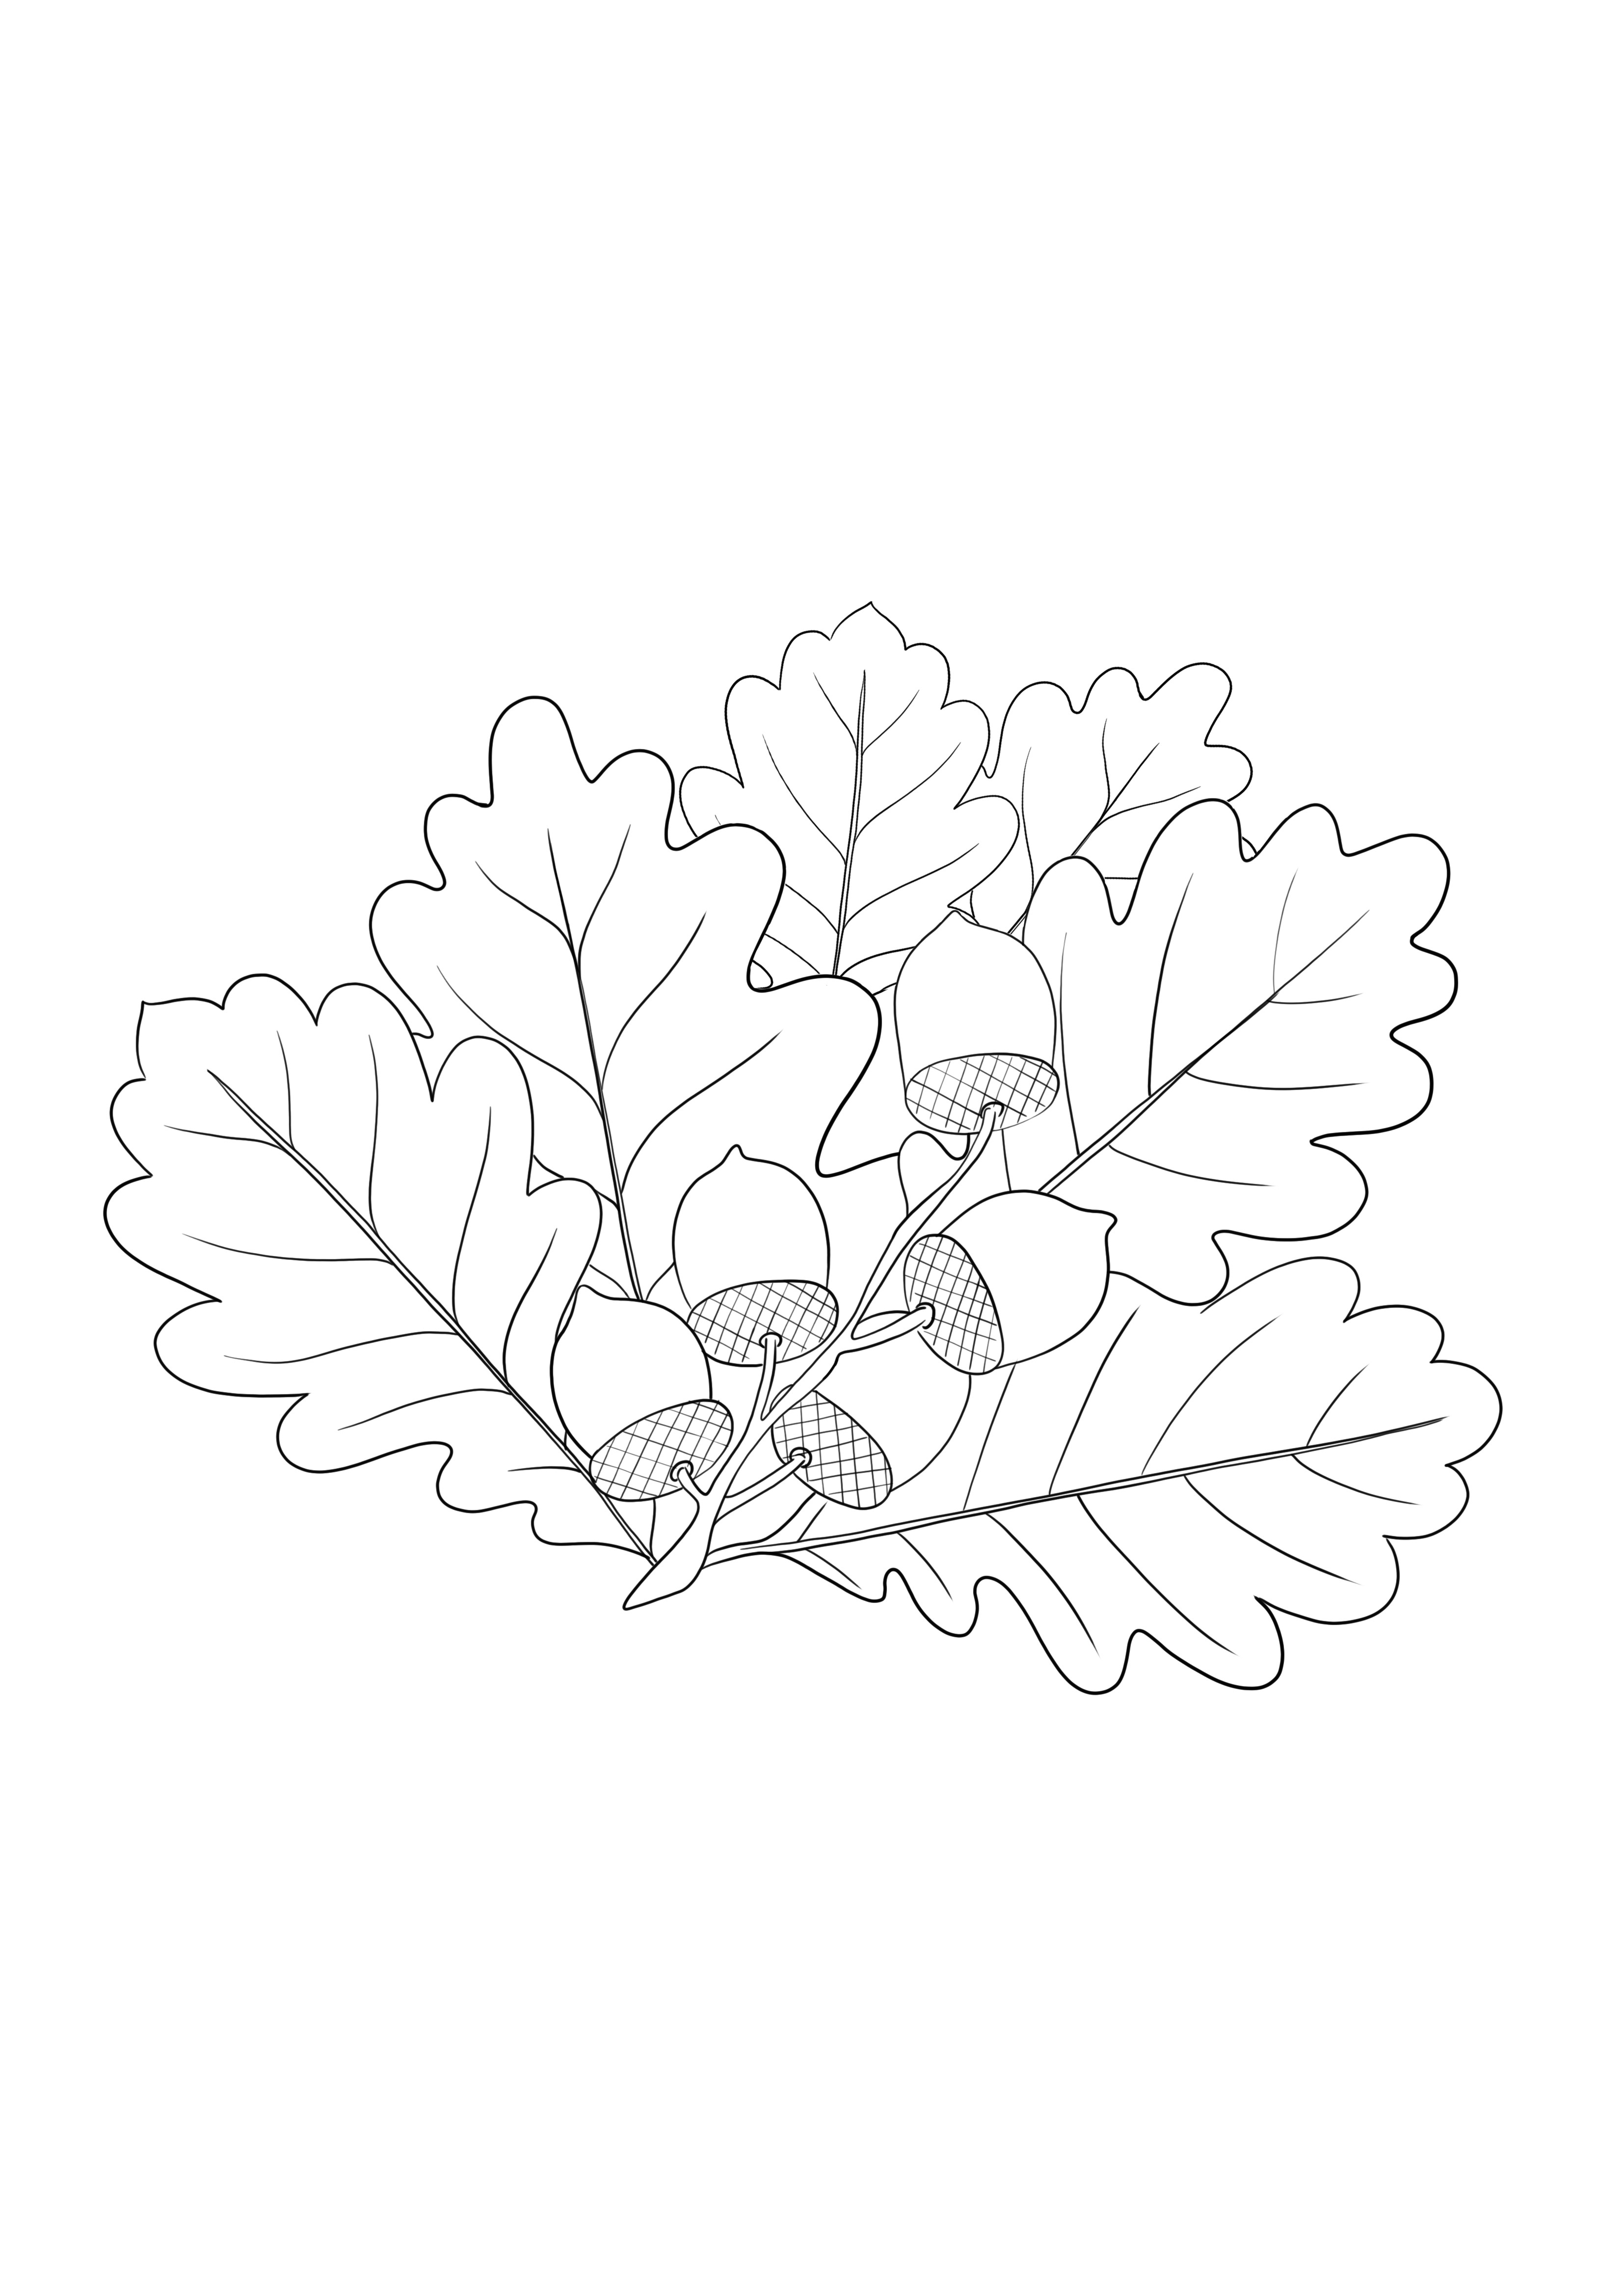 Oak branch- leaves and acorns free to download and color image